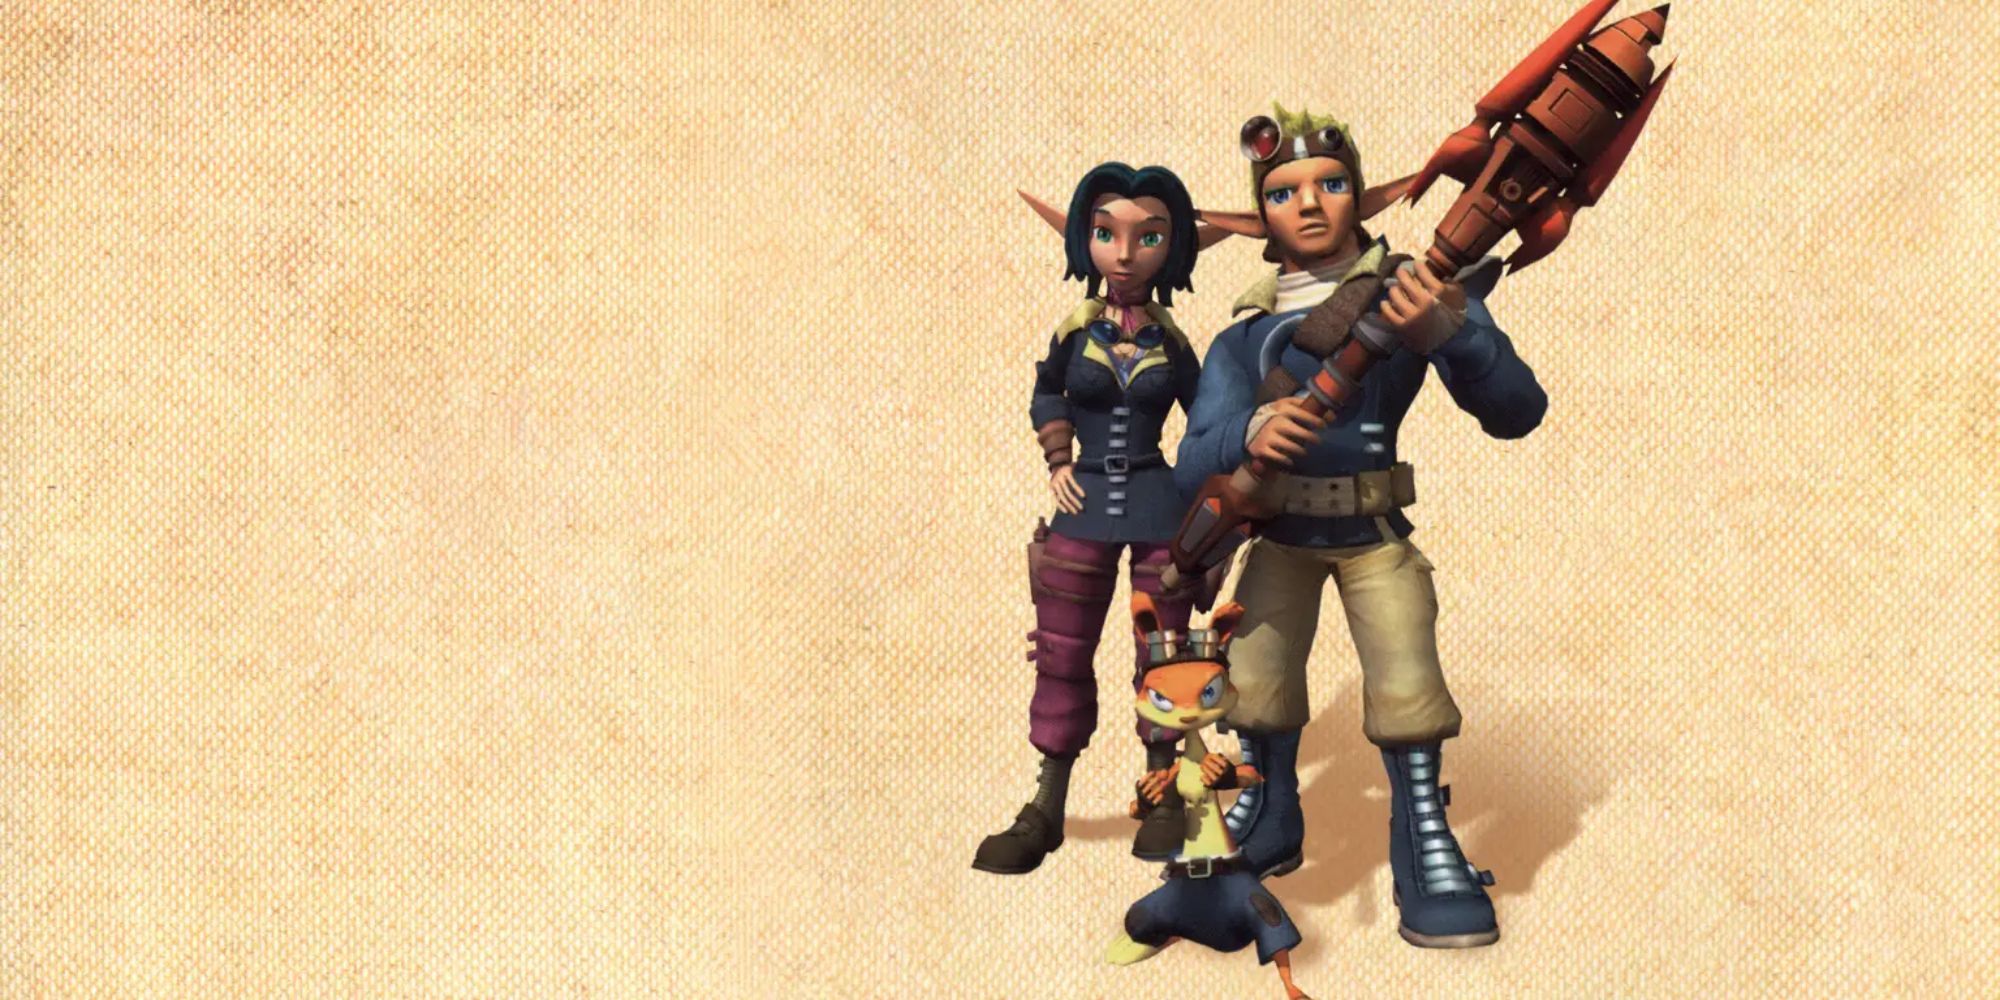 Jak, Kiera, and Daxter in The Lost Frontier.